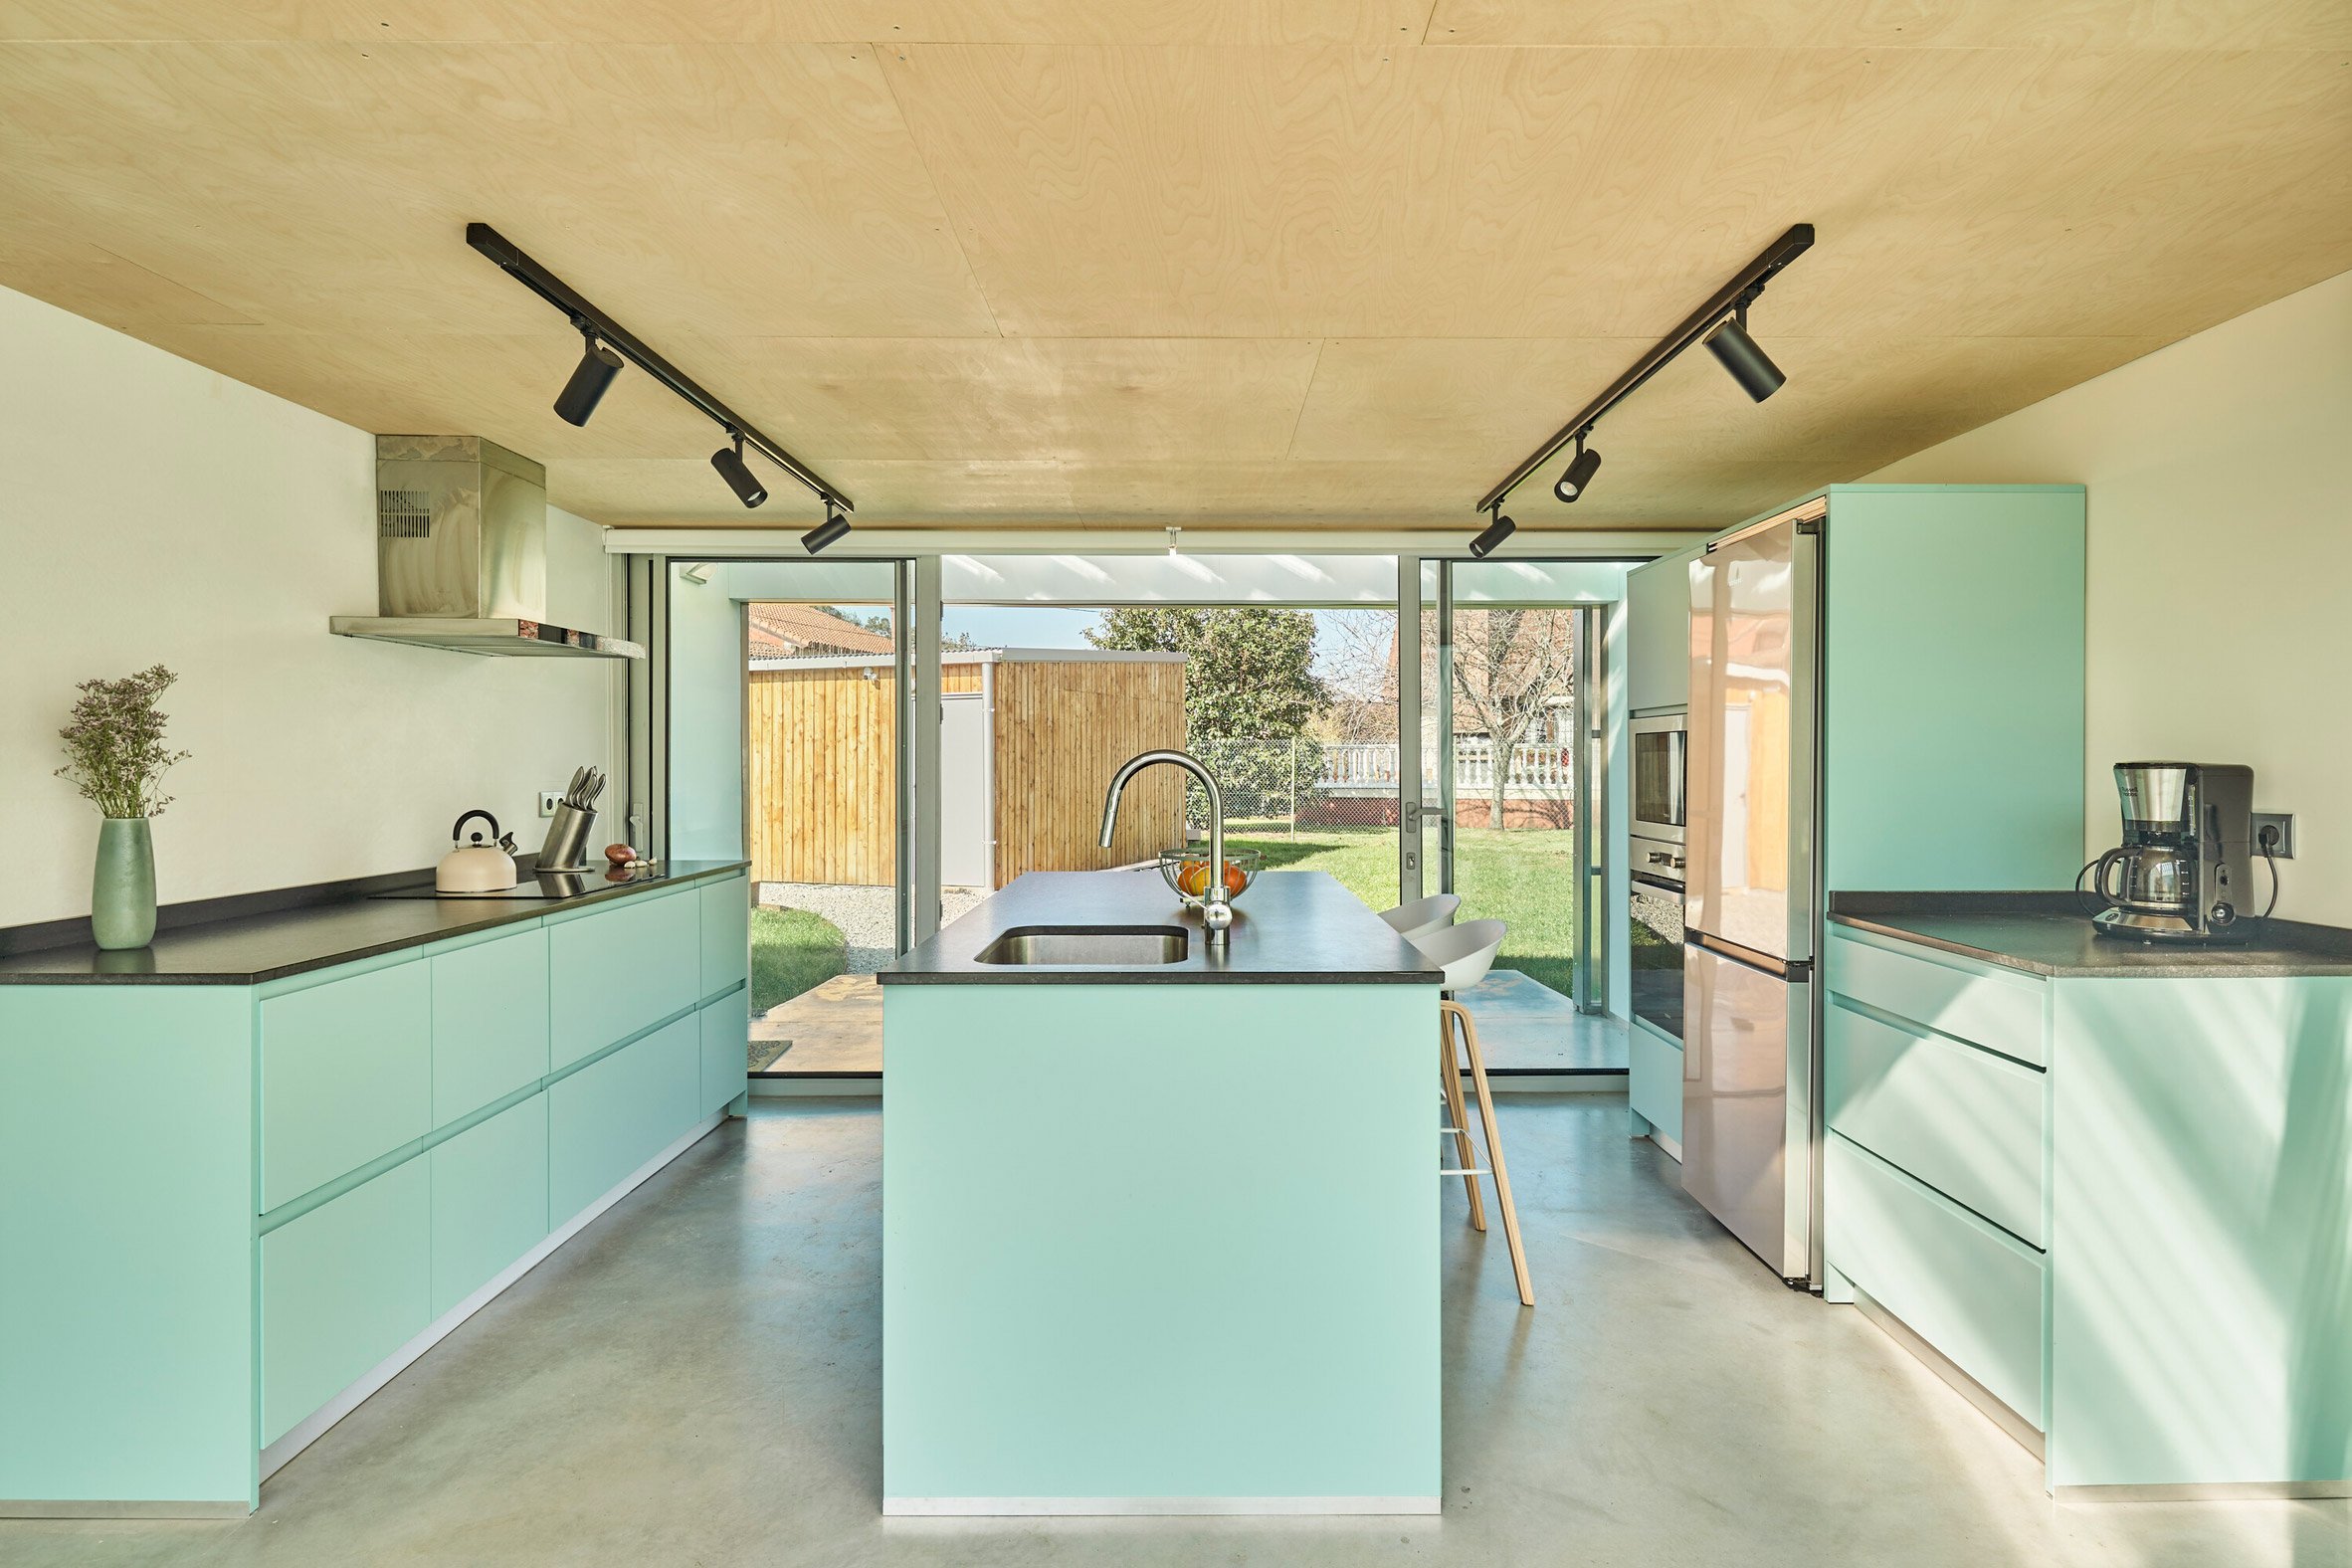 Teal kitchen in The Cork and Wood House by Gurea Arquitectura Cooperativa in Spain